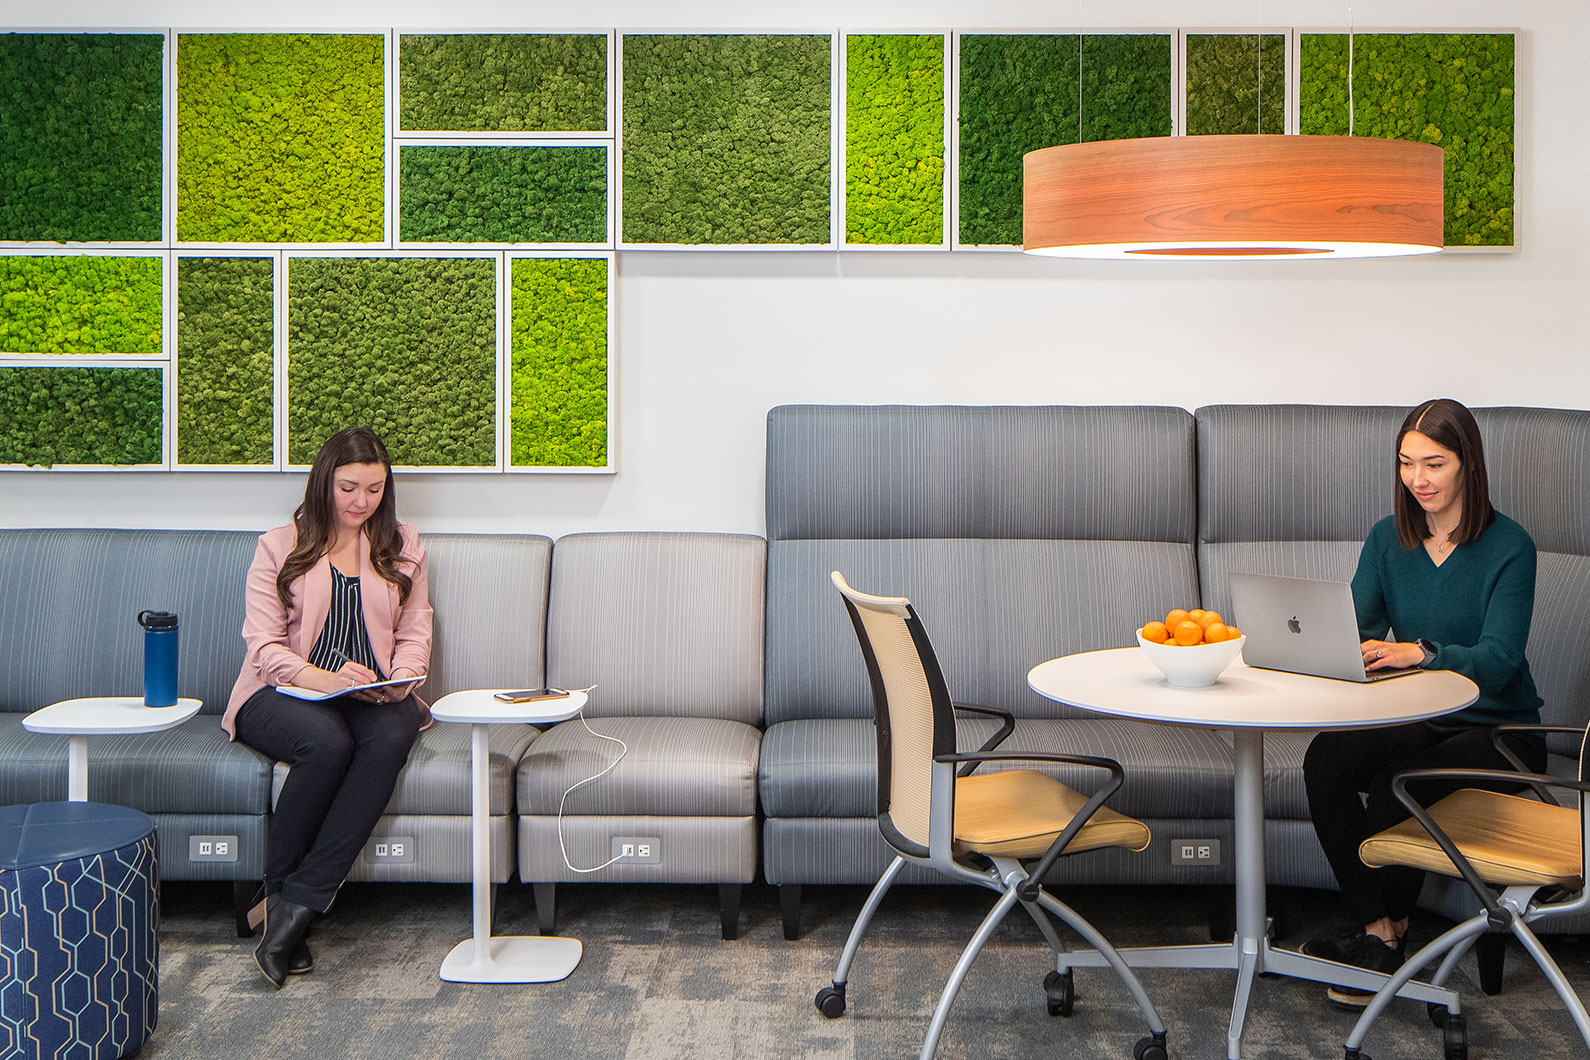 Two residency doctors sitting again living green wall